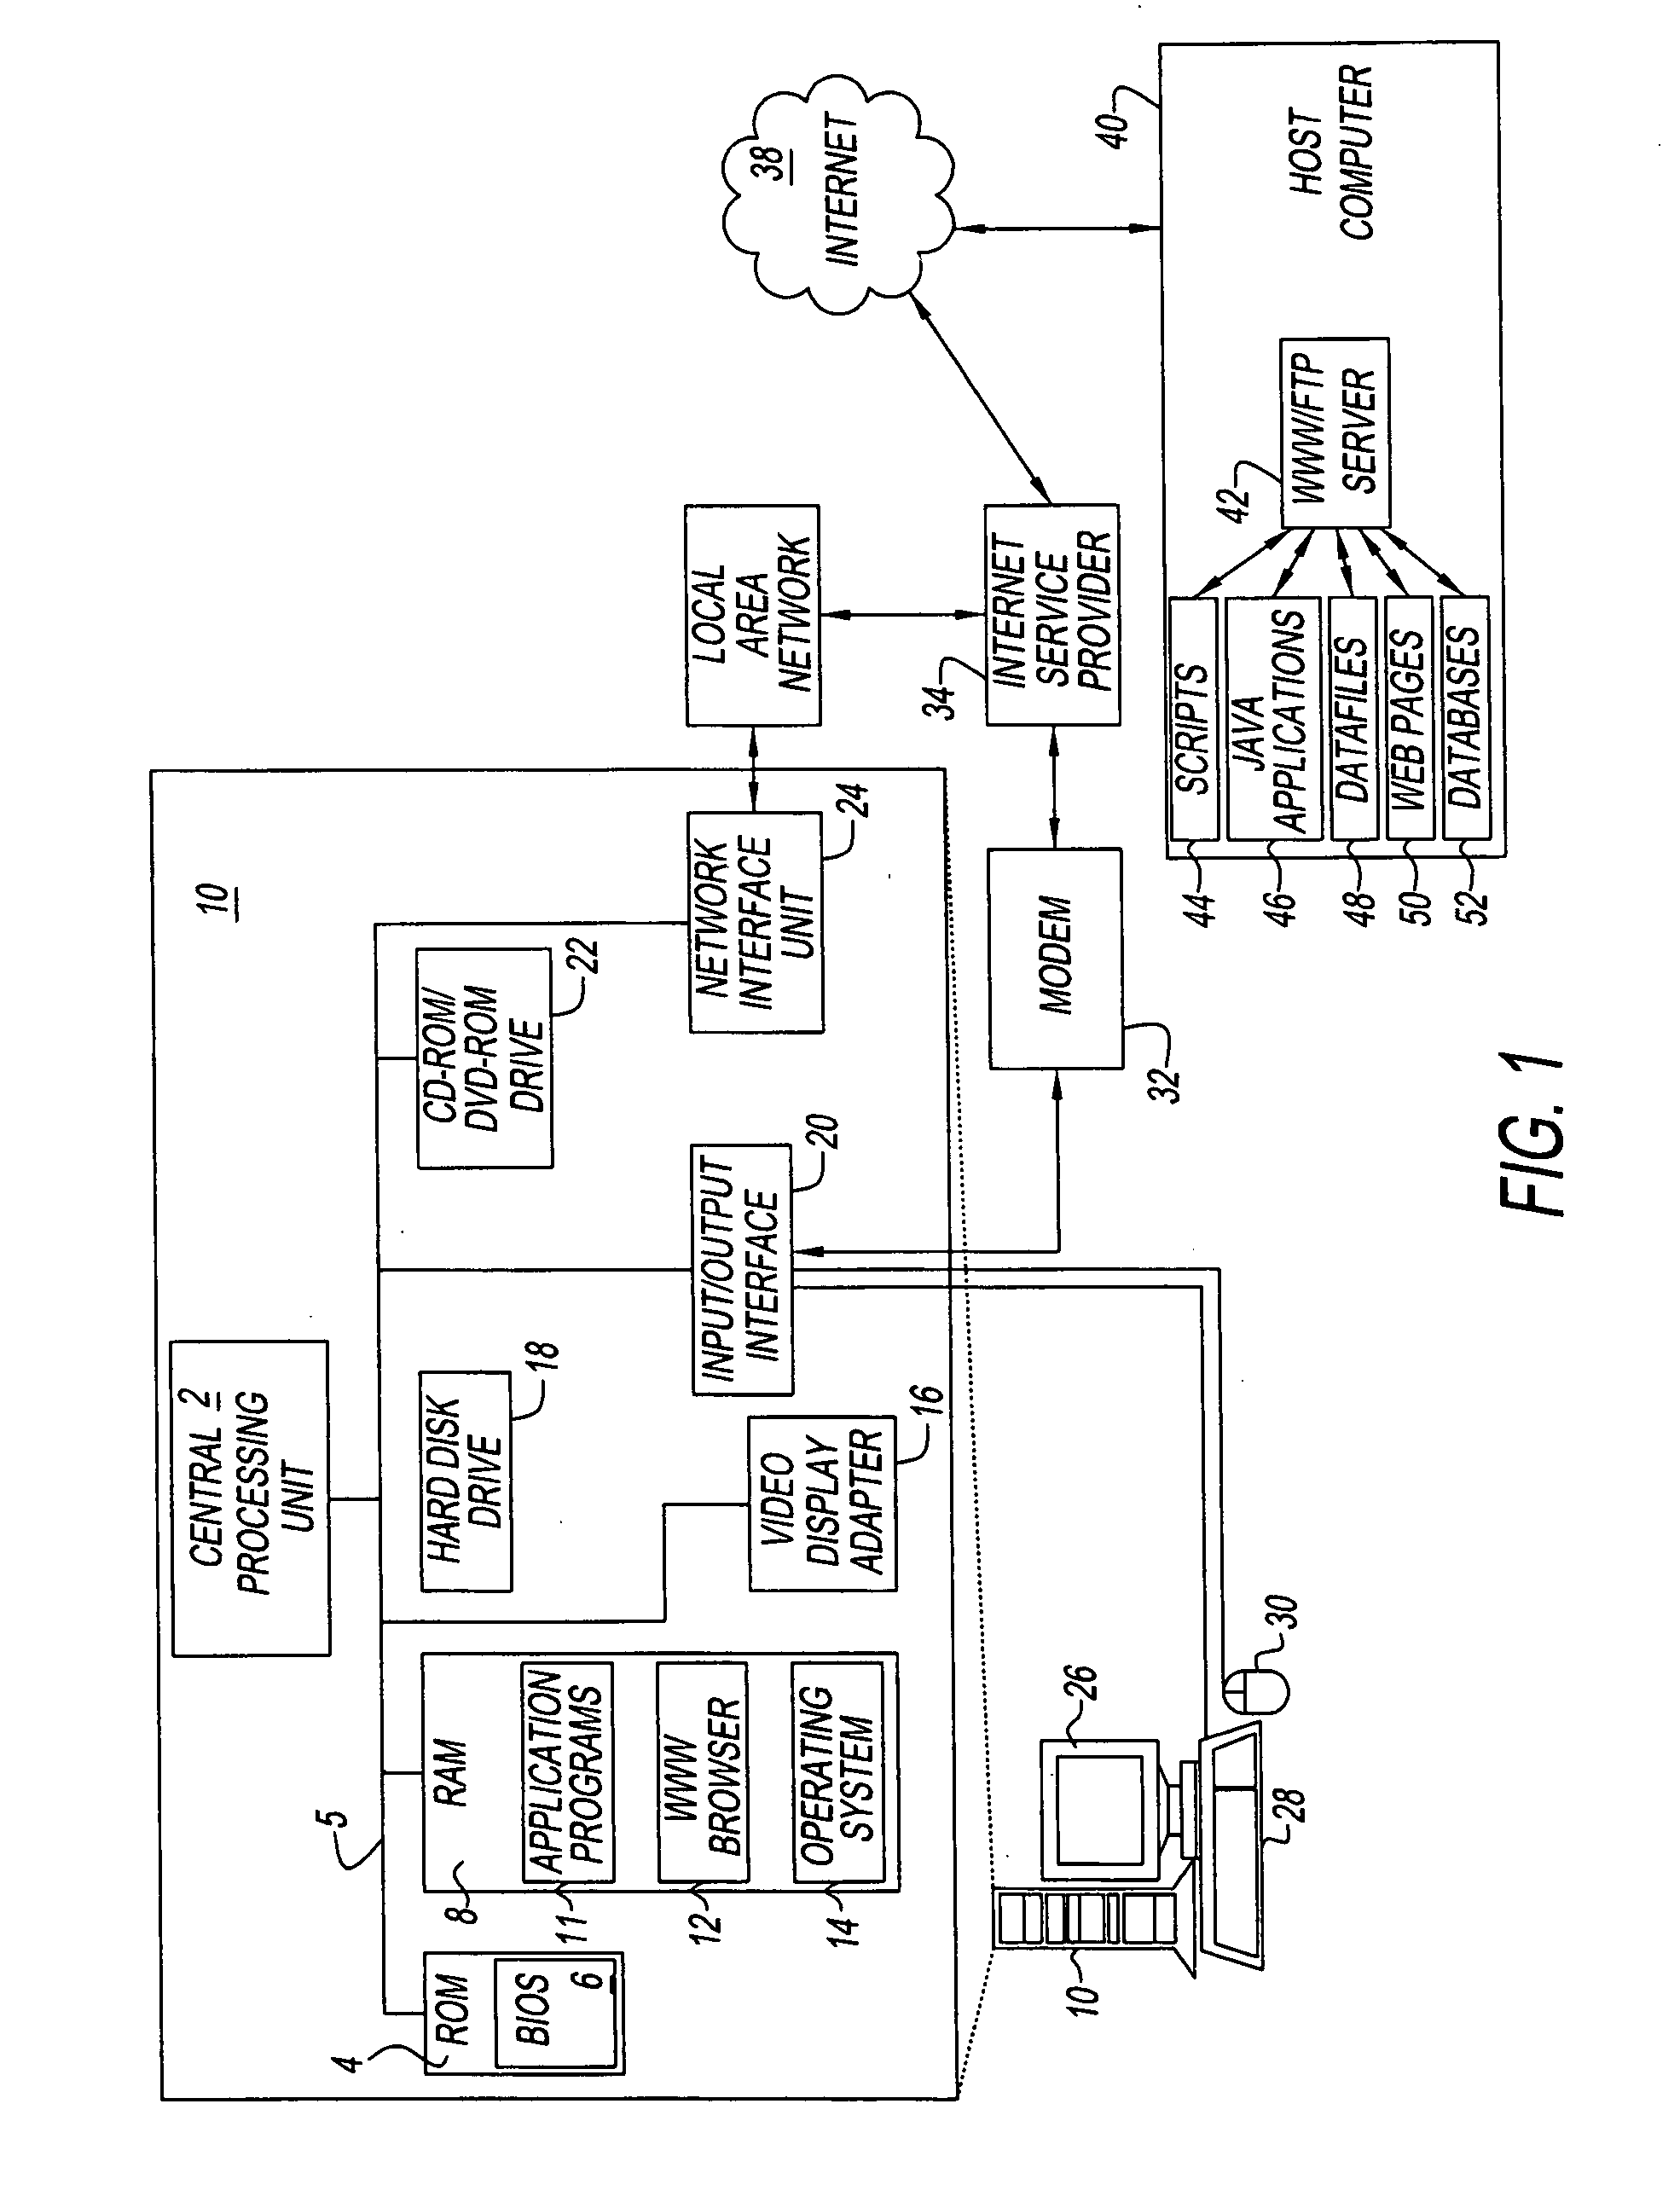 Method of using skeletal animation data to ascertain risk in a surveillance system